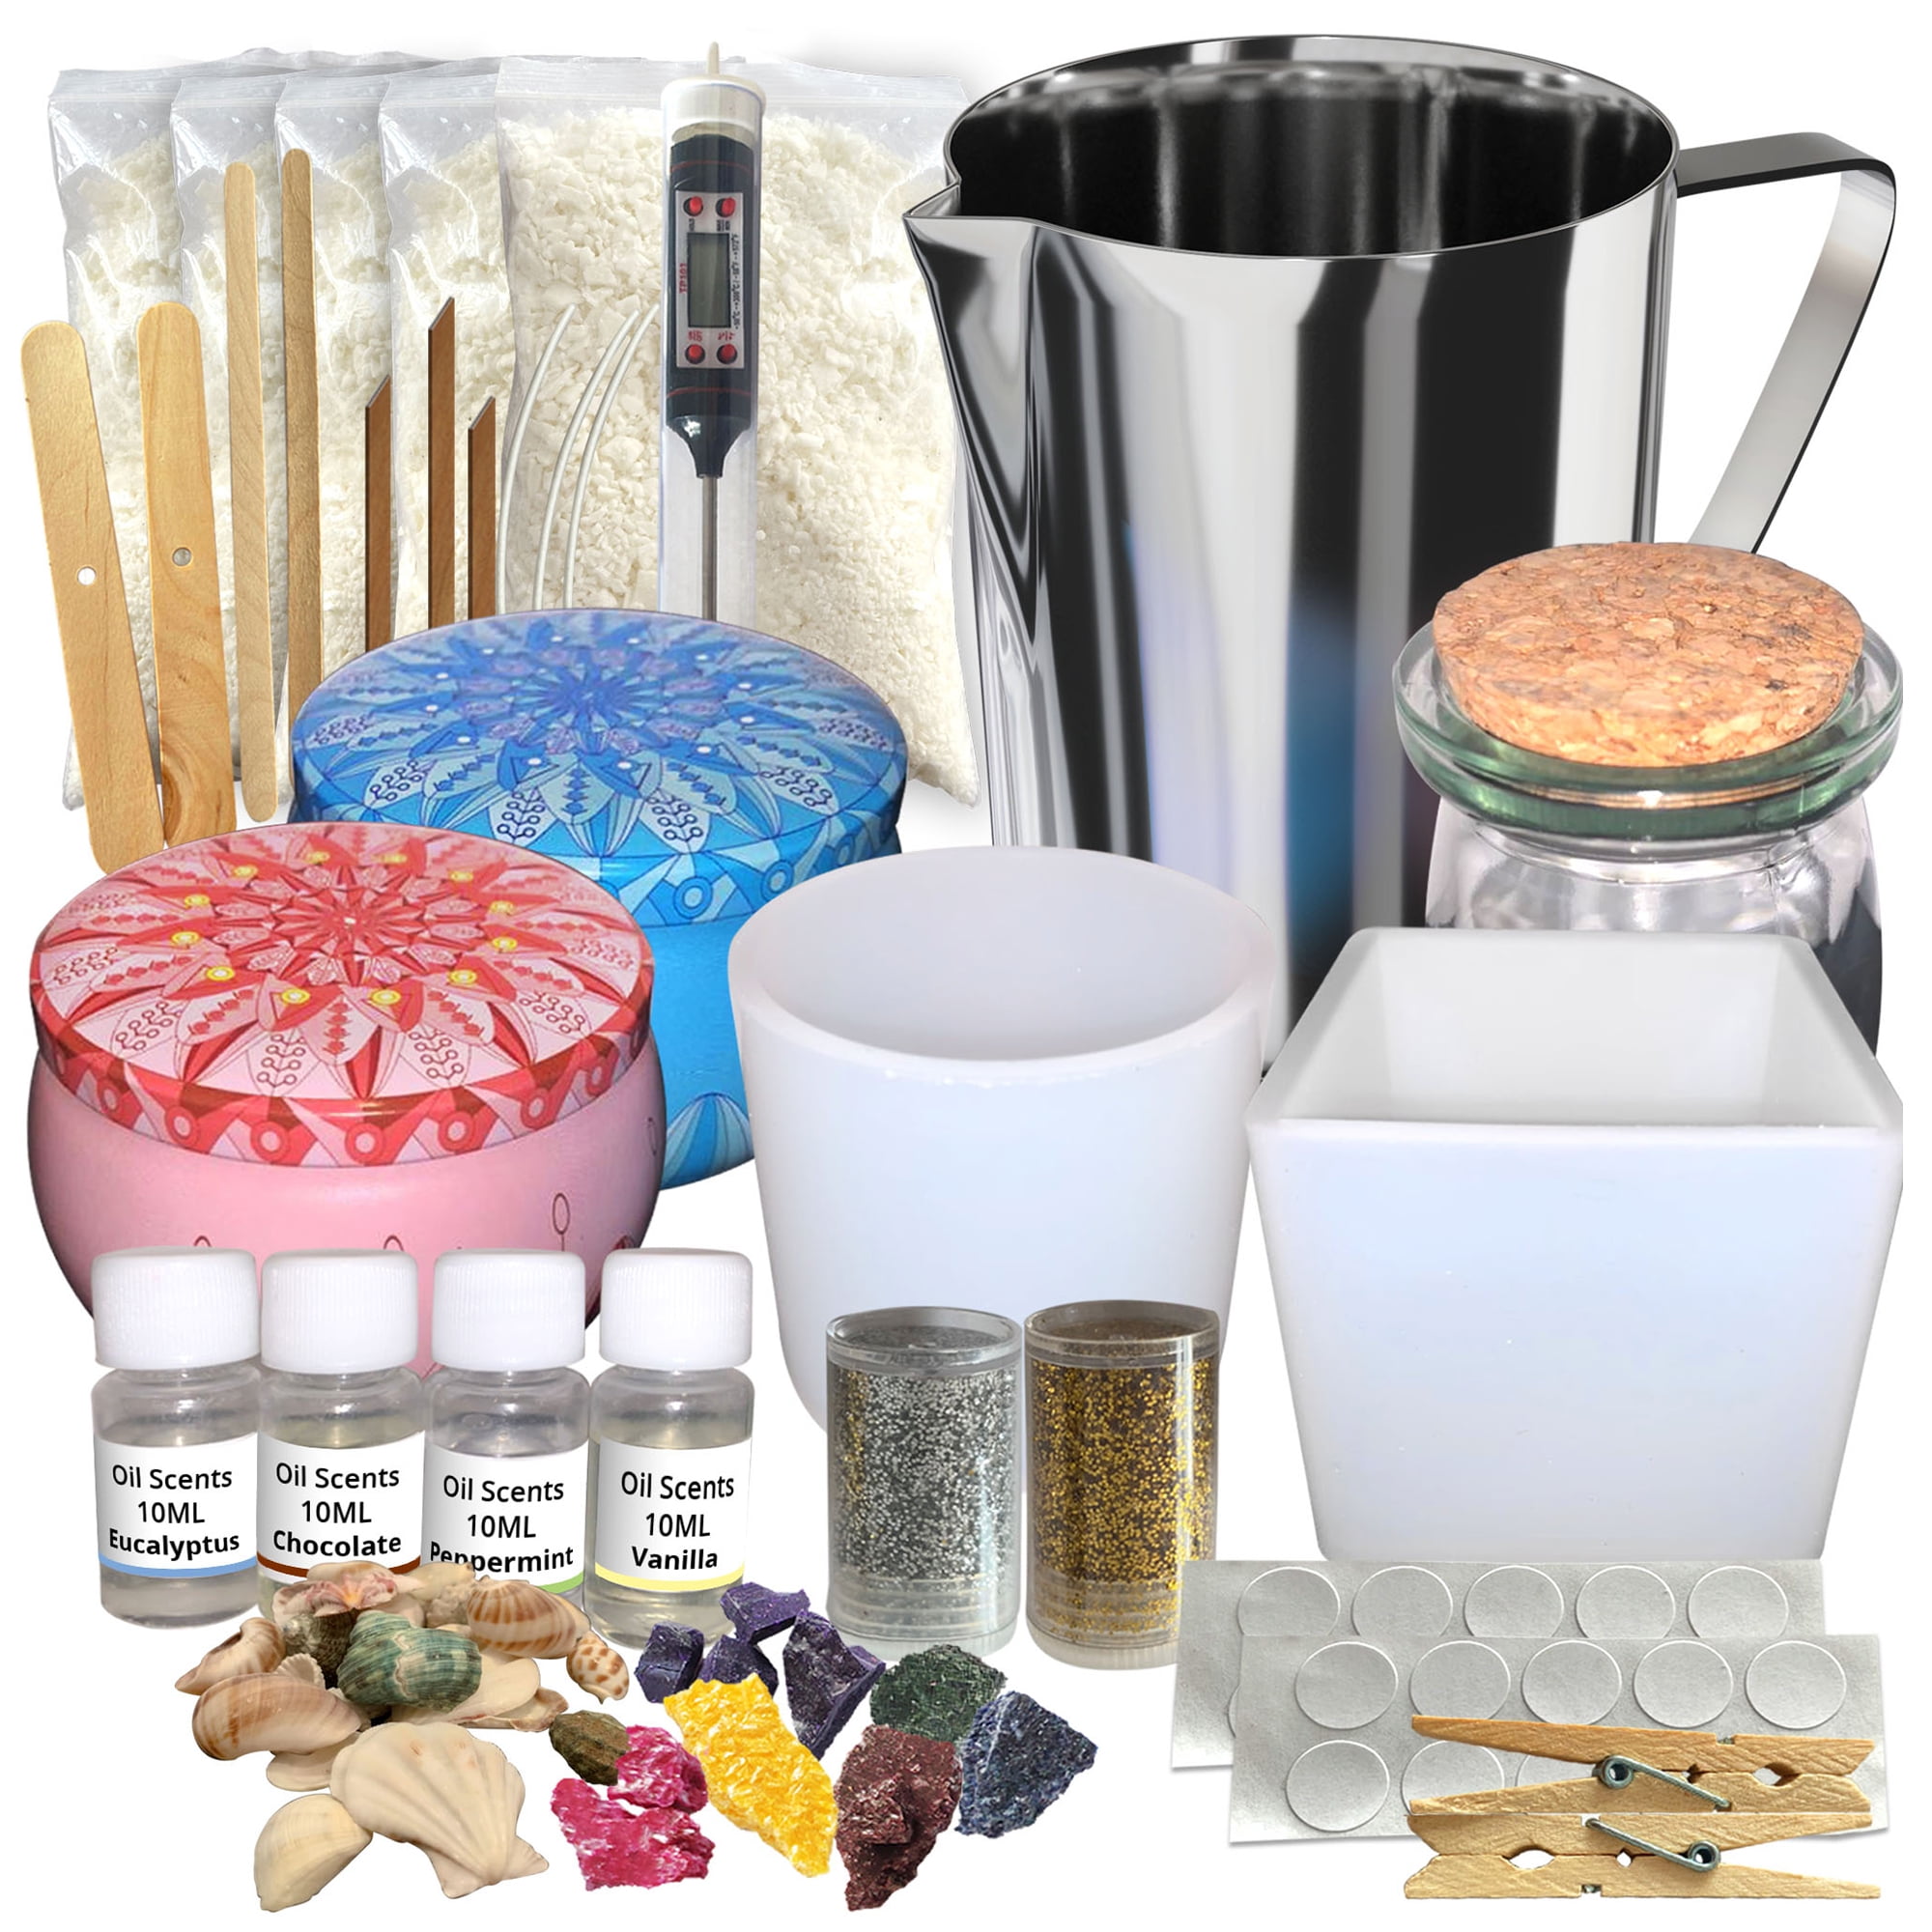 Complete Candle Making Kit with Wax Melter,Candle Making Supplies